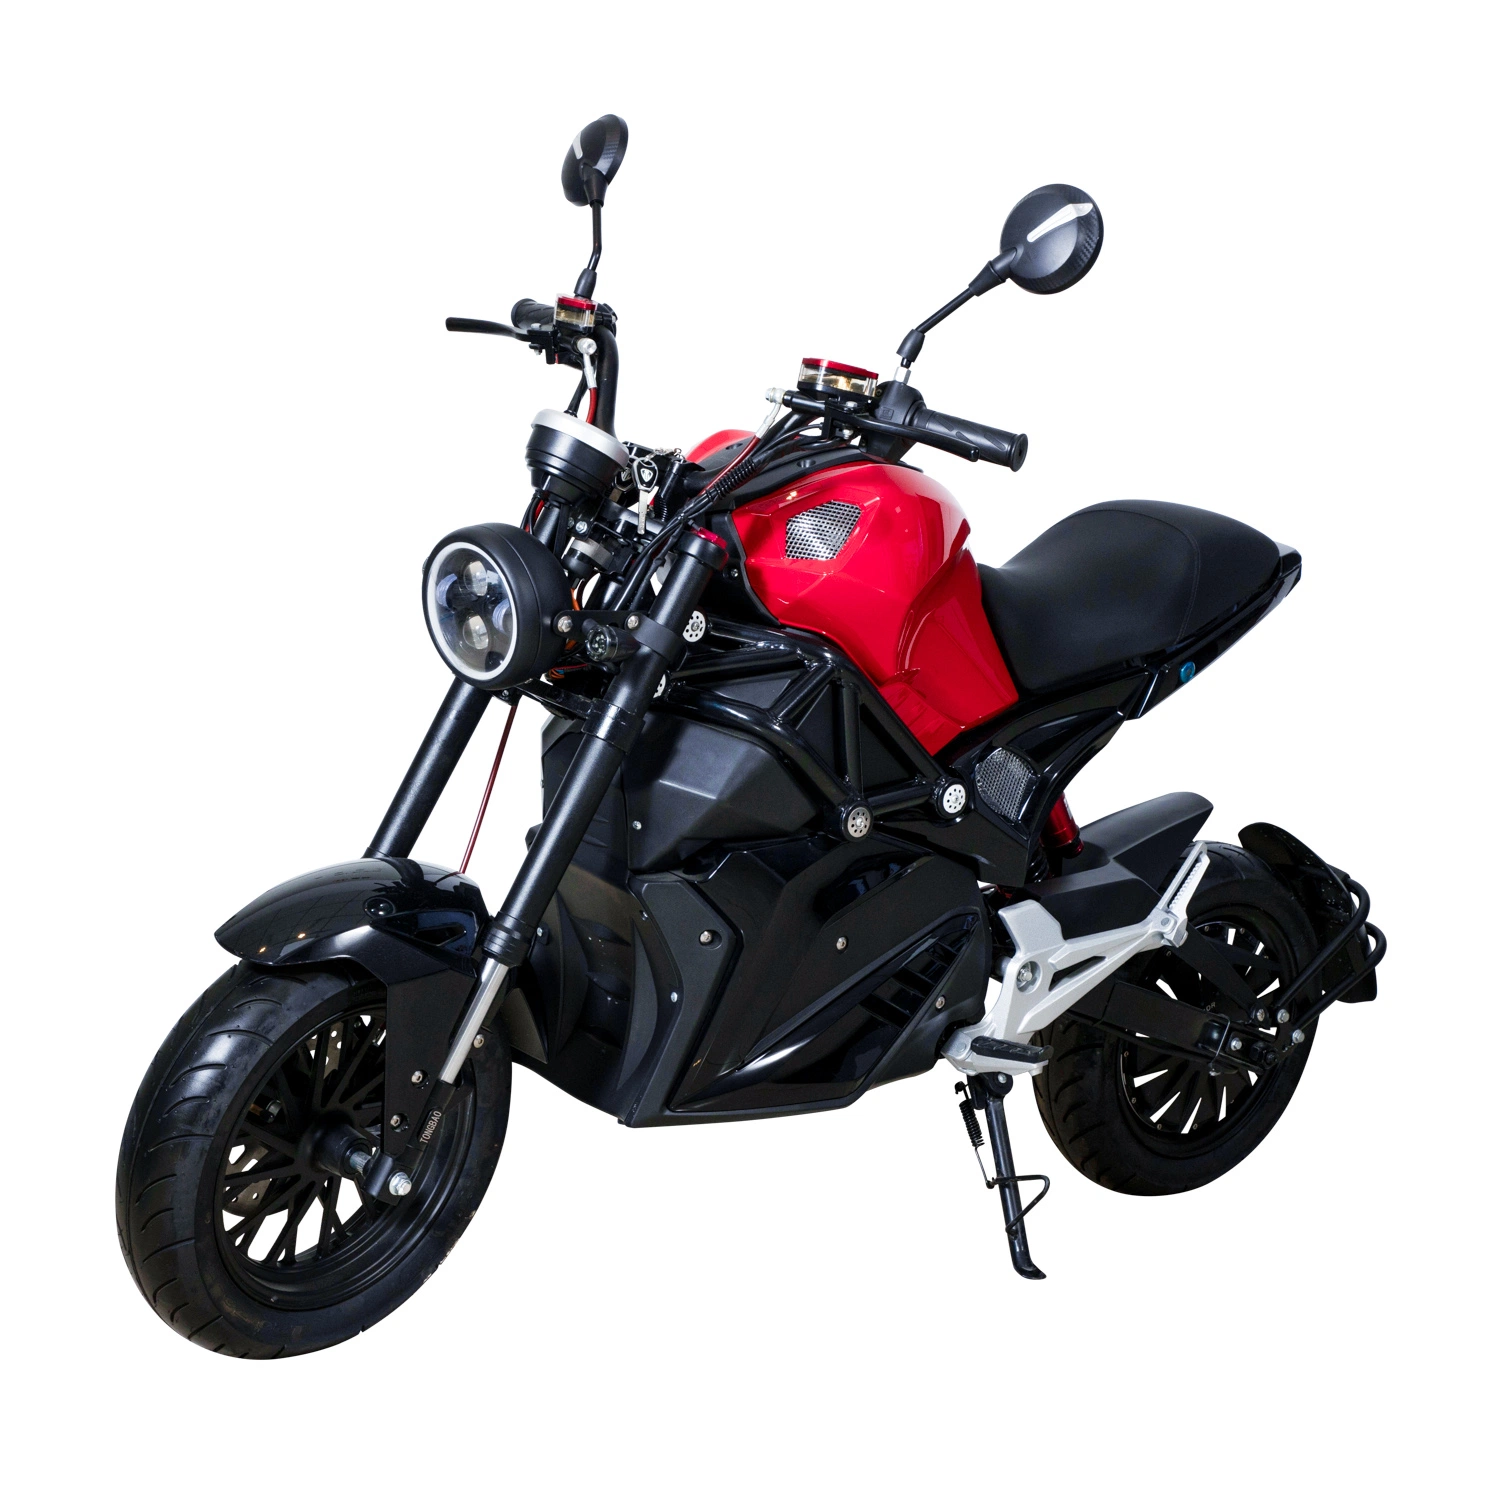 Sport Motorcycle / 150cc Moto / 150cc Scooter / 125 Cc Scooter / 100cc Motorcycle / 125 Cc Dirt Bike